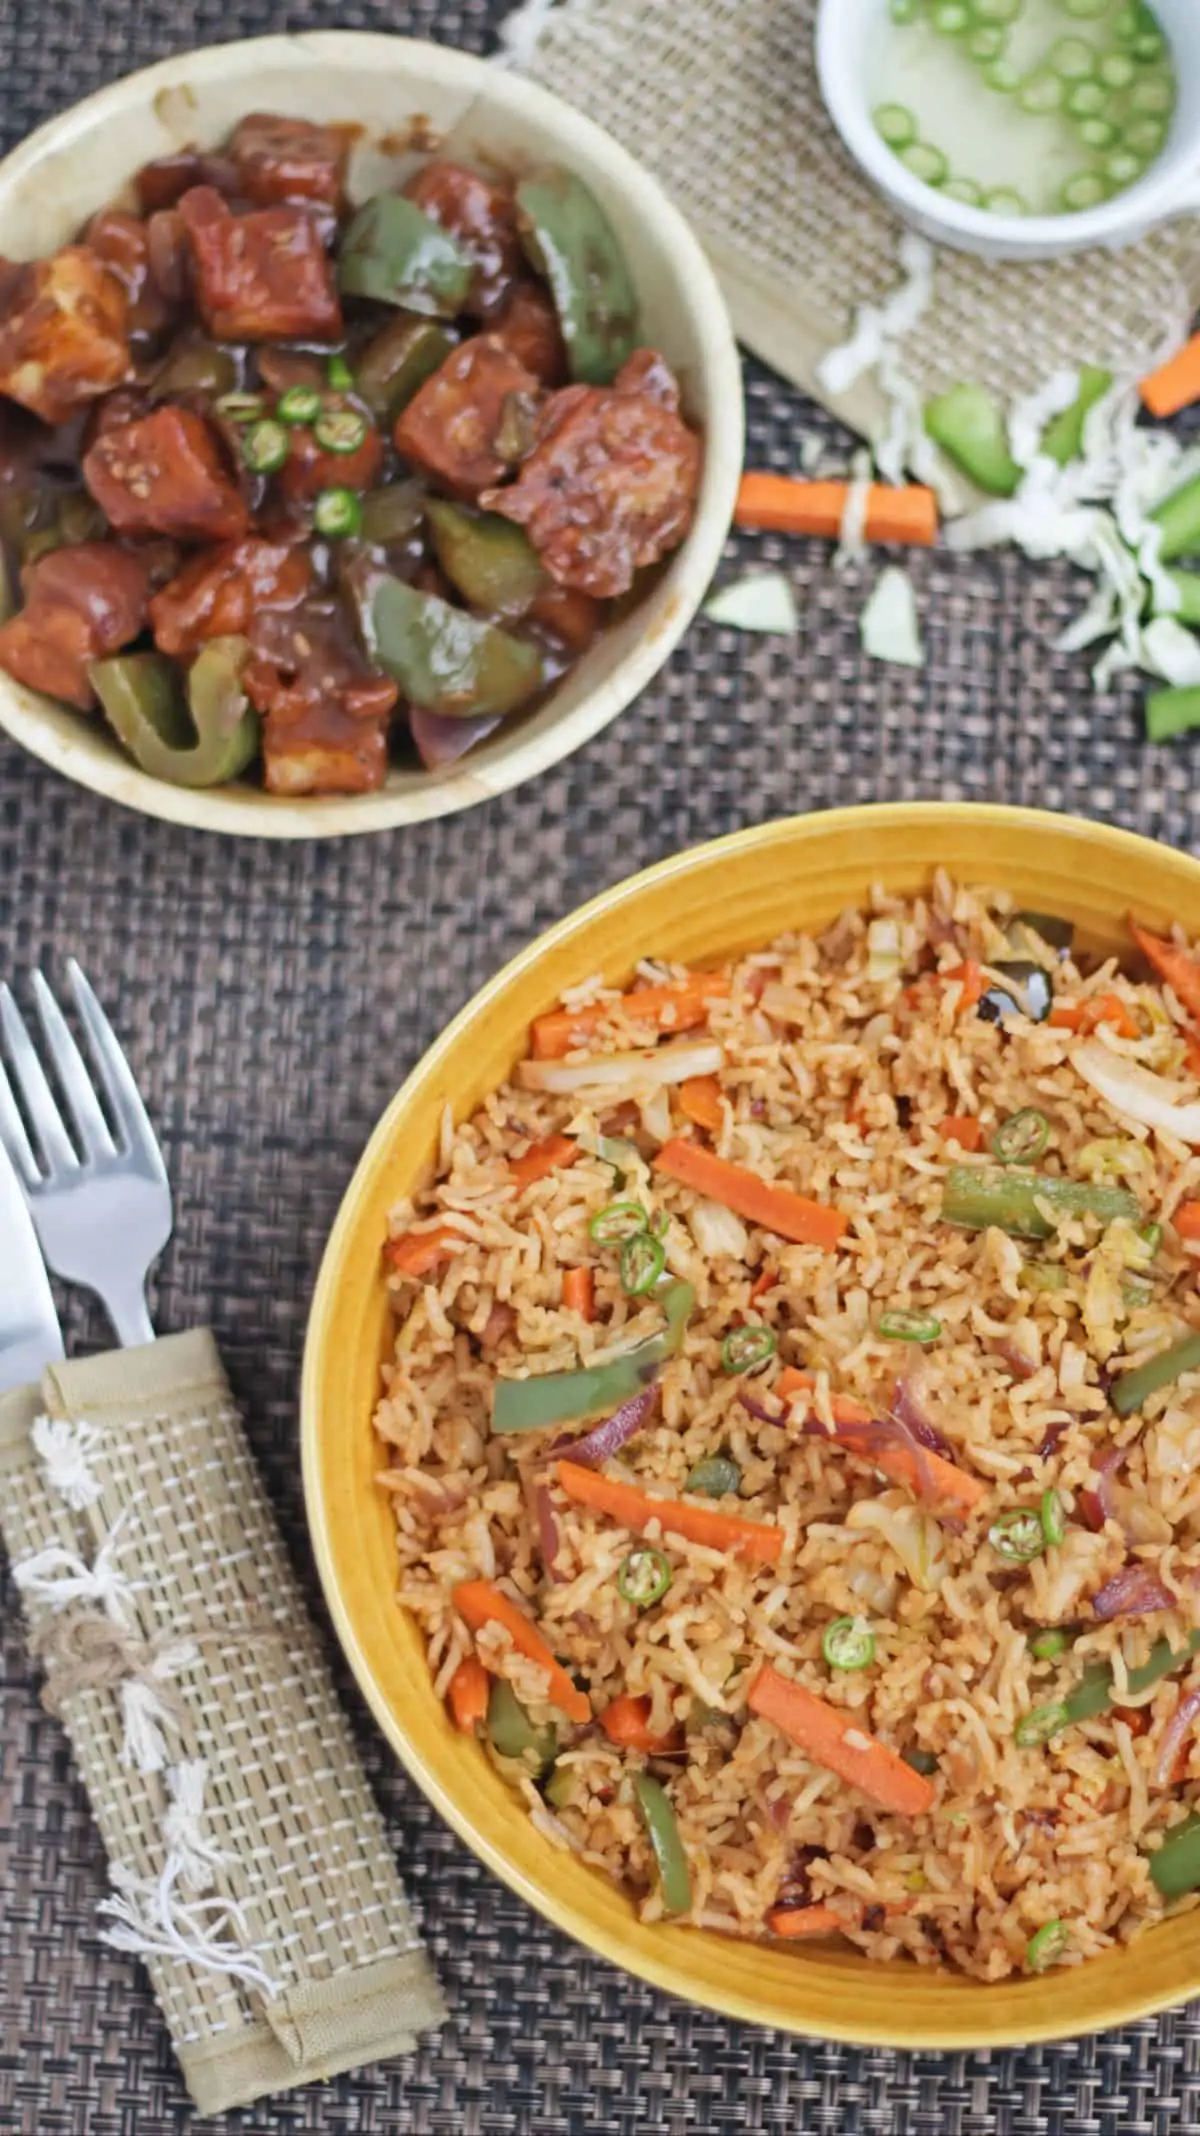 Schezwan fried rice in a bowl with side dish